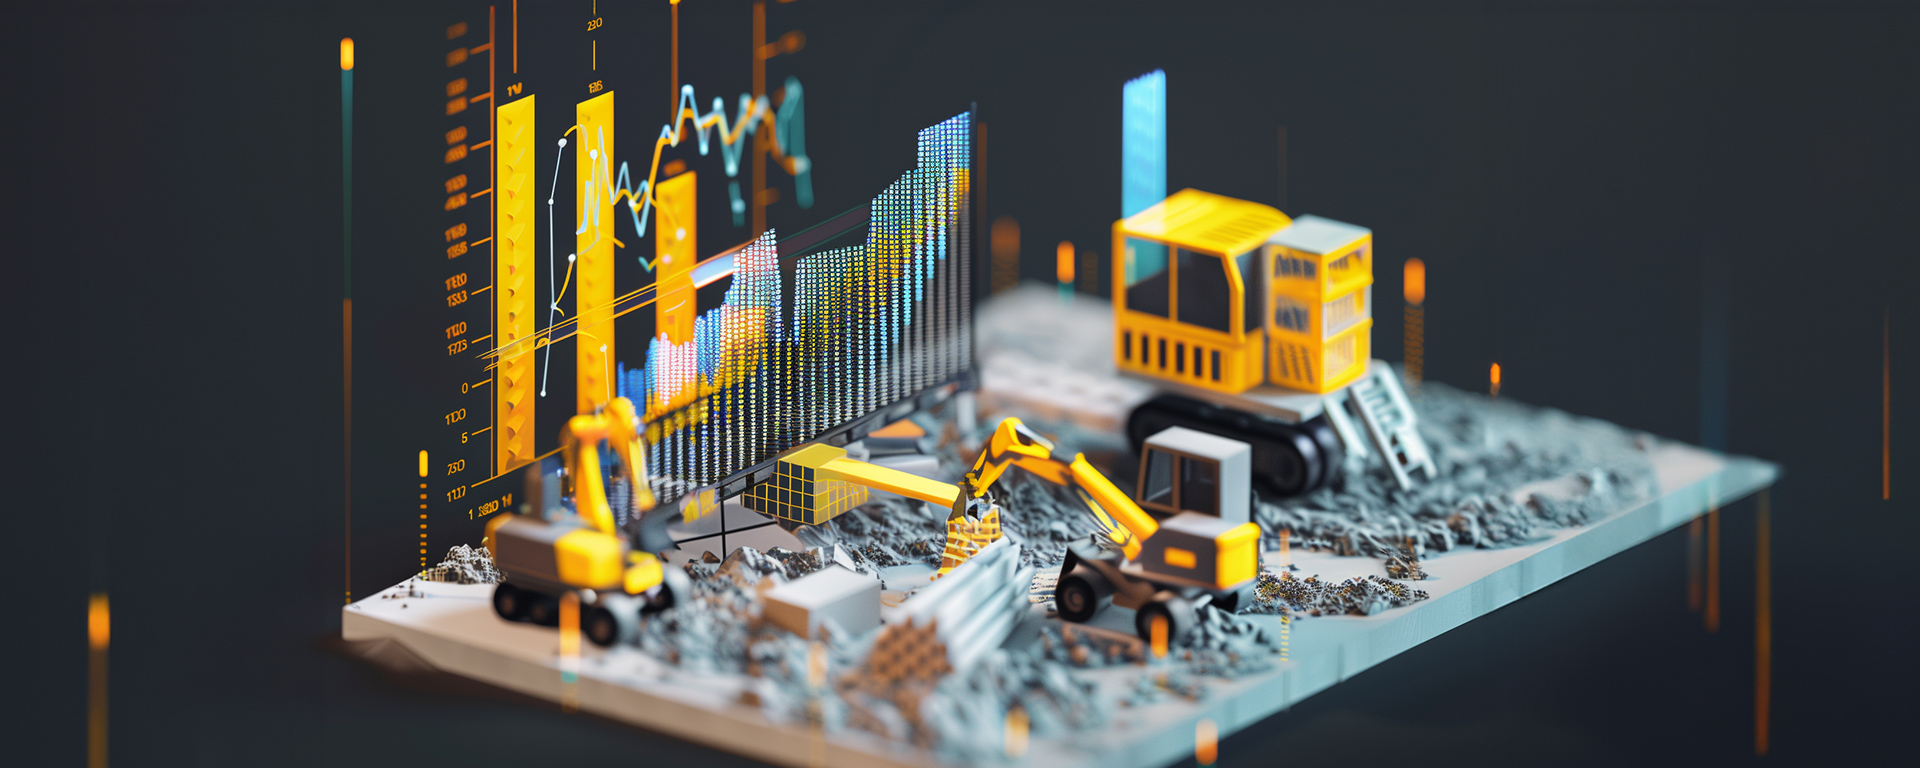 A detailed 3D illustration of a construction site with heavy machinery and vibrant financial graphs representing the latest trends in building industry analytics against a dark background.